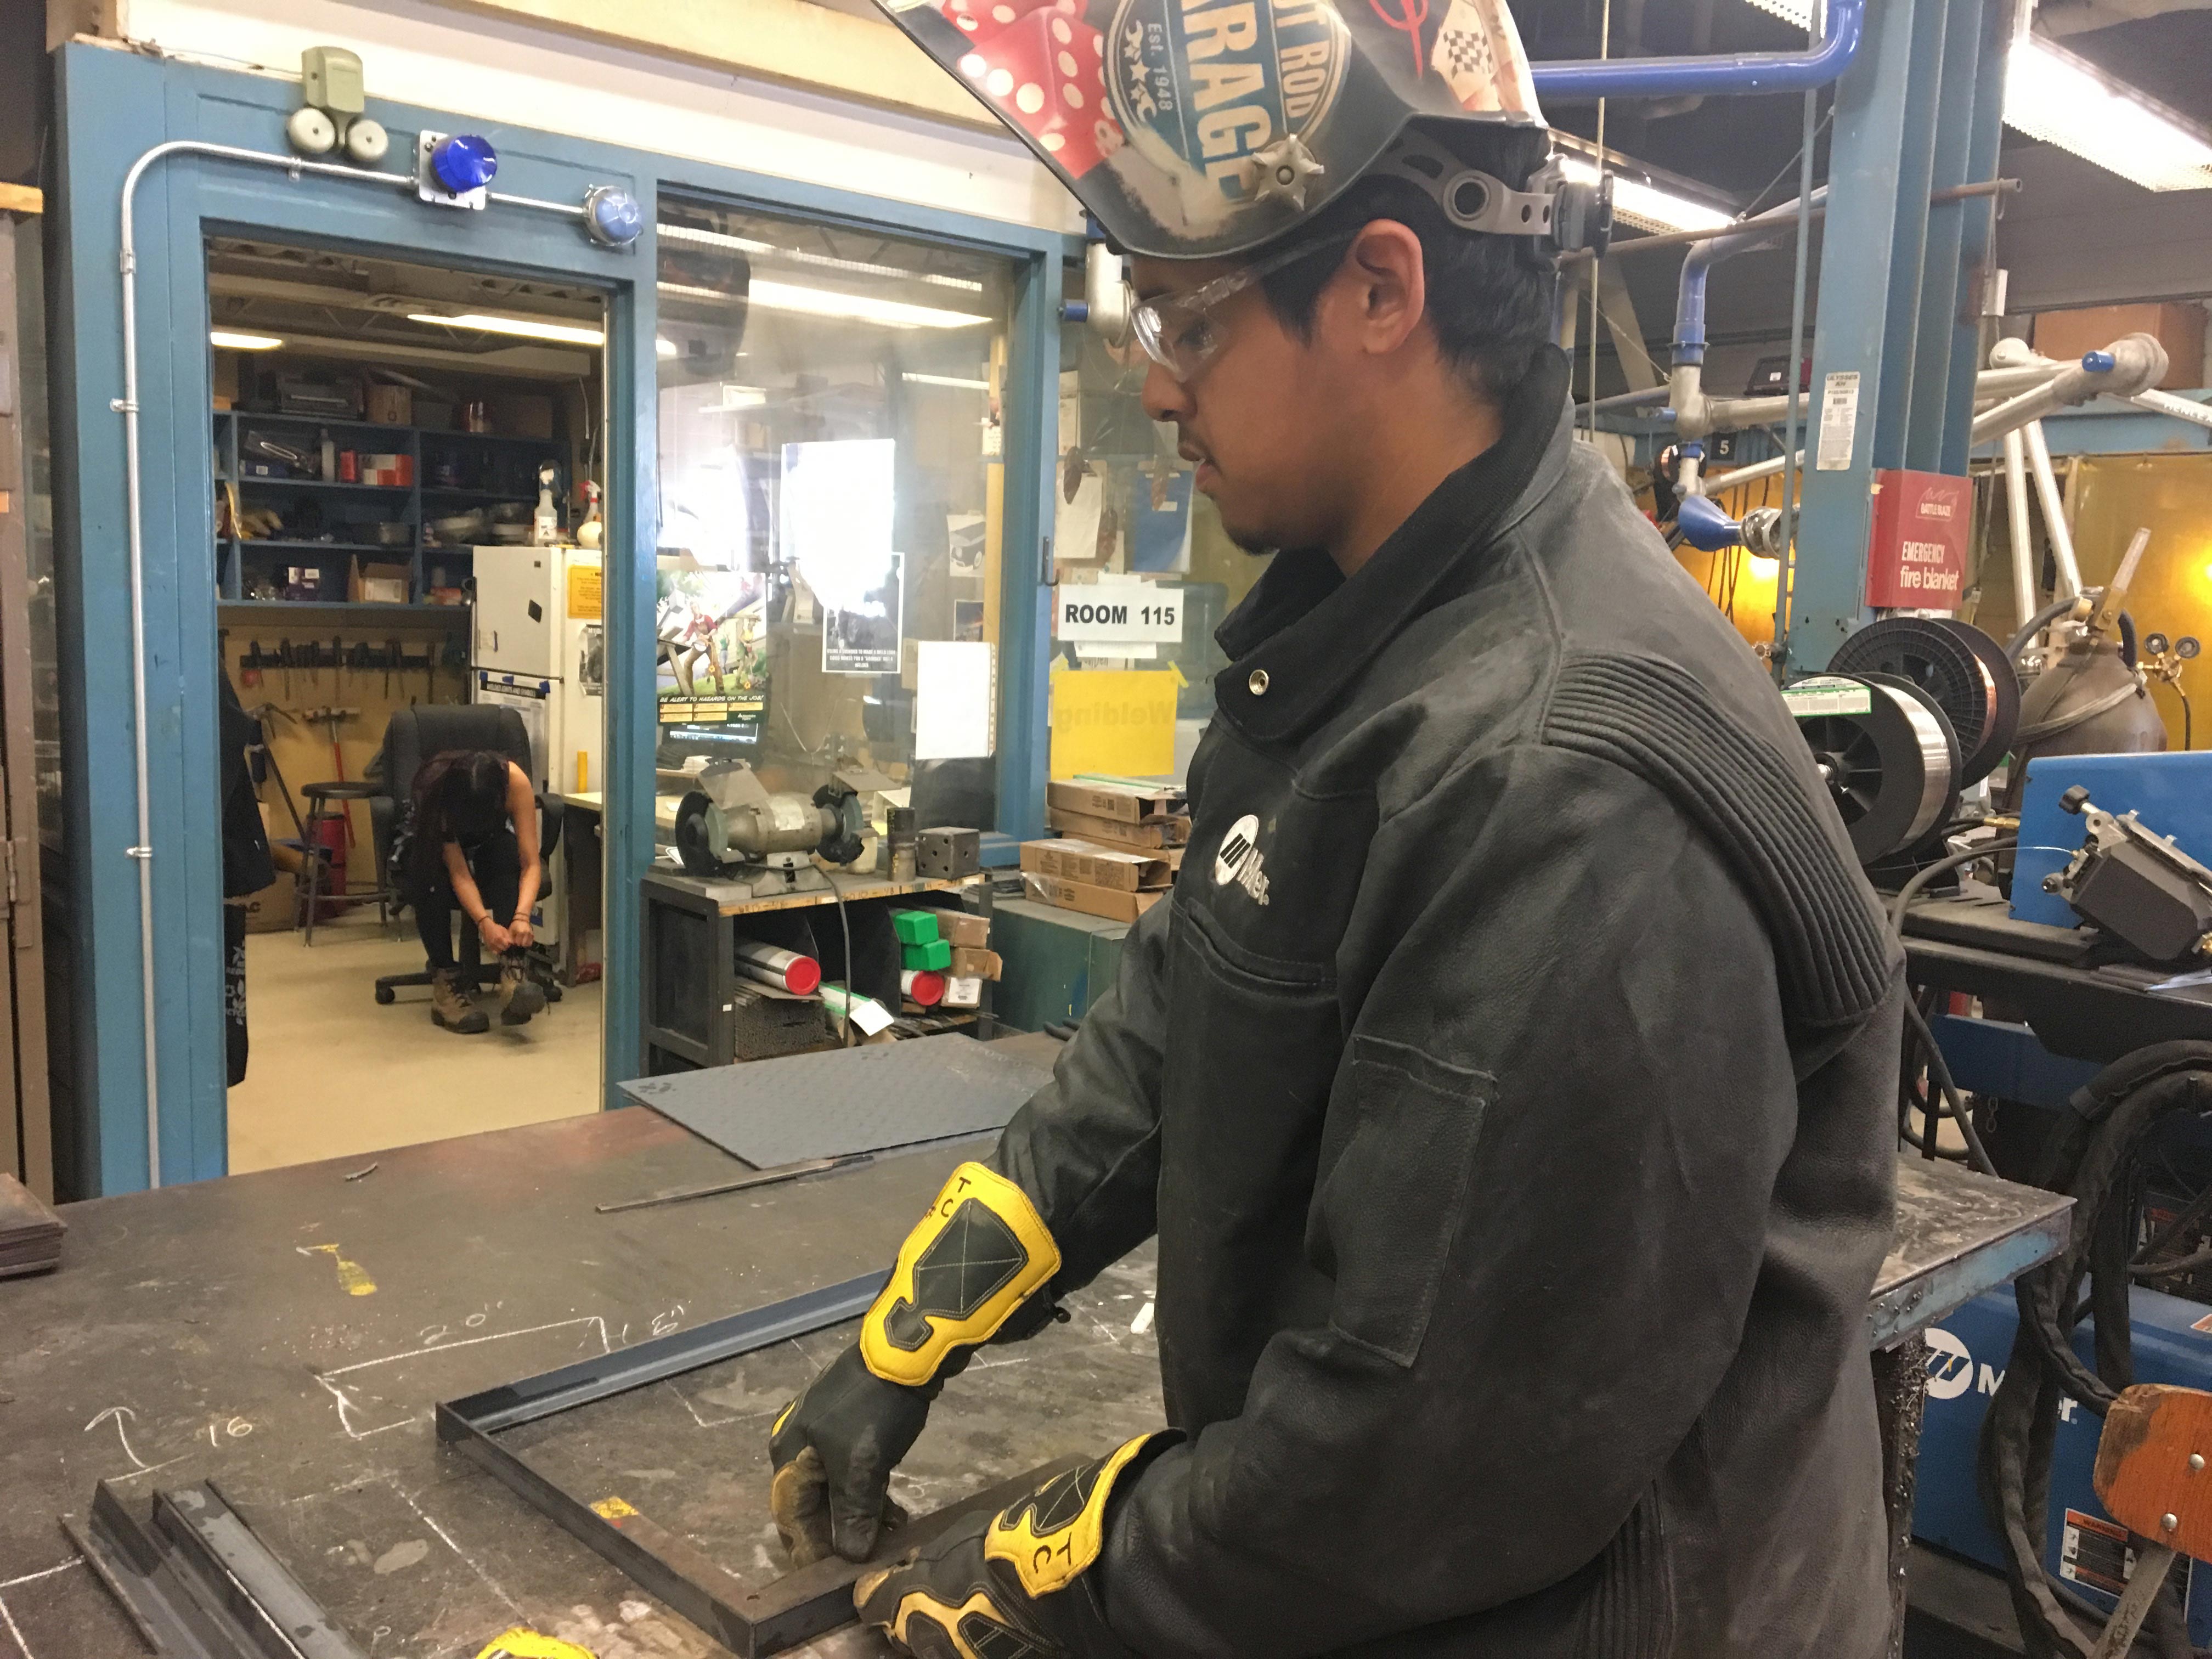 17-year-old Trevor Creely at work in the welding shop. Photo: Brittany Hobson/APTN